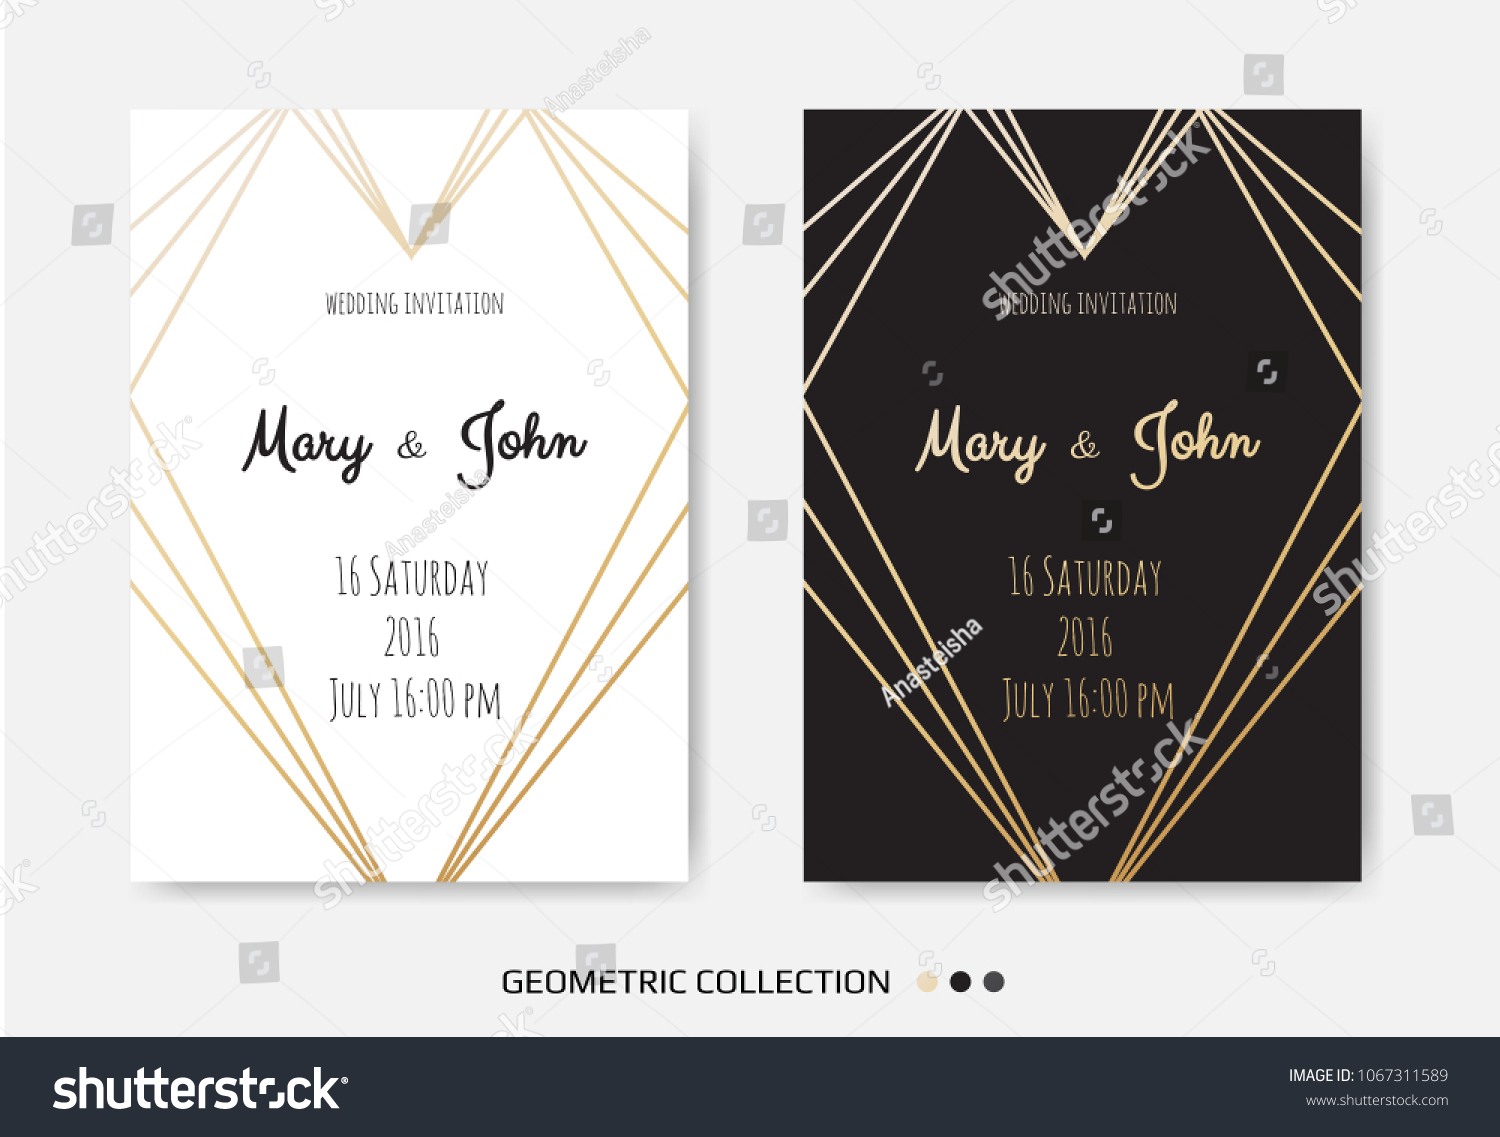 Wedding Invitation, invite card design with Geometrical art lines, gold foil border, frame. Vector modern geometric abstract template layout. #1067311589